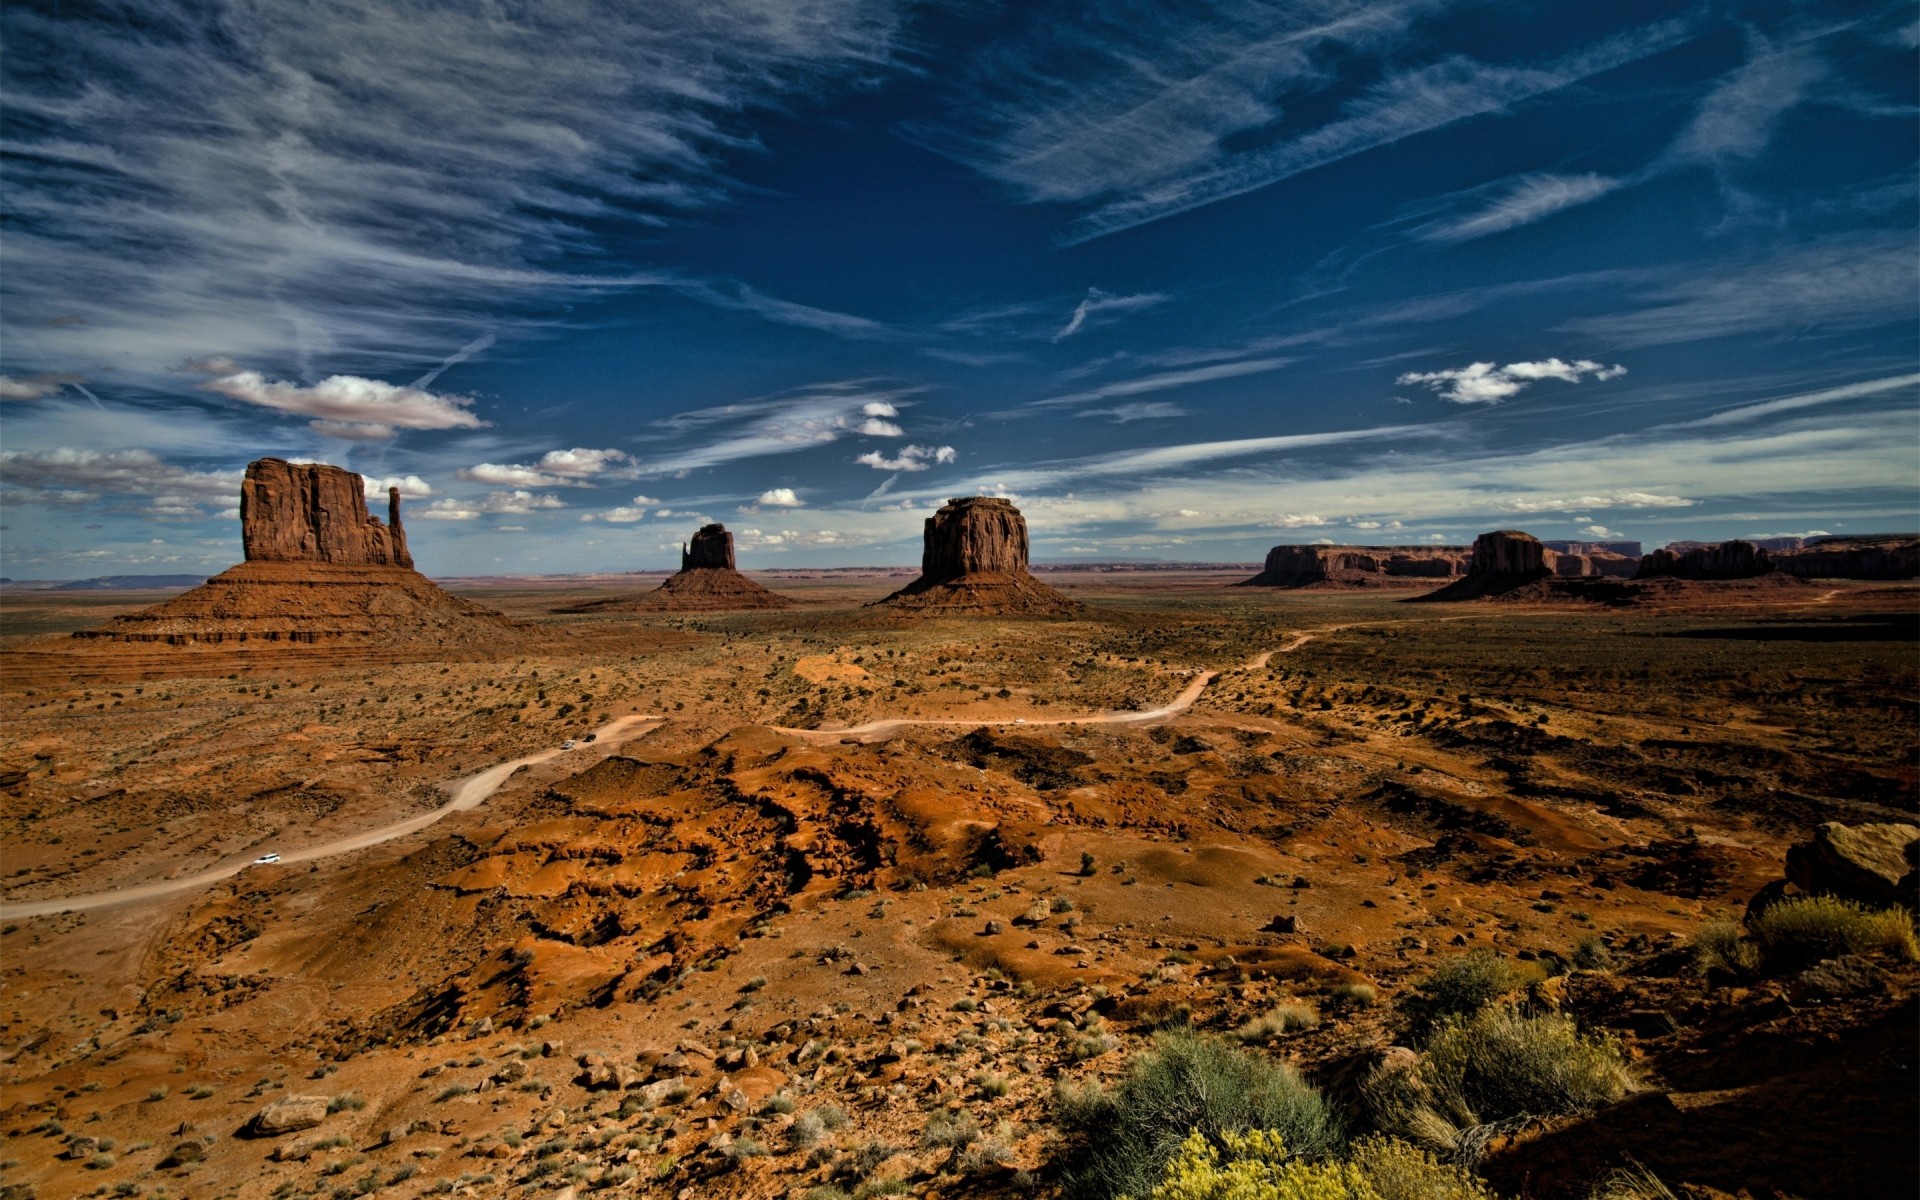 united states landscape desert travel rock sunset sky sandstone outdoors scenic dry dawn nature geology arid mountain sand barren valley monument valley usa mountains